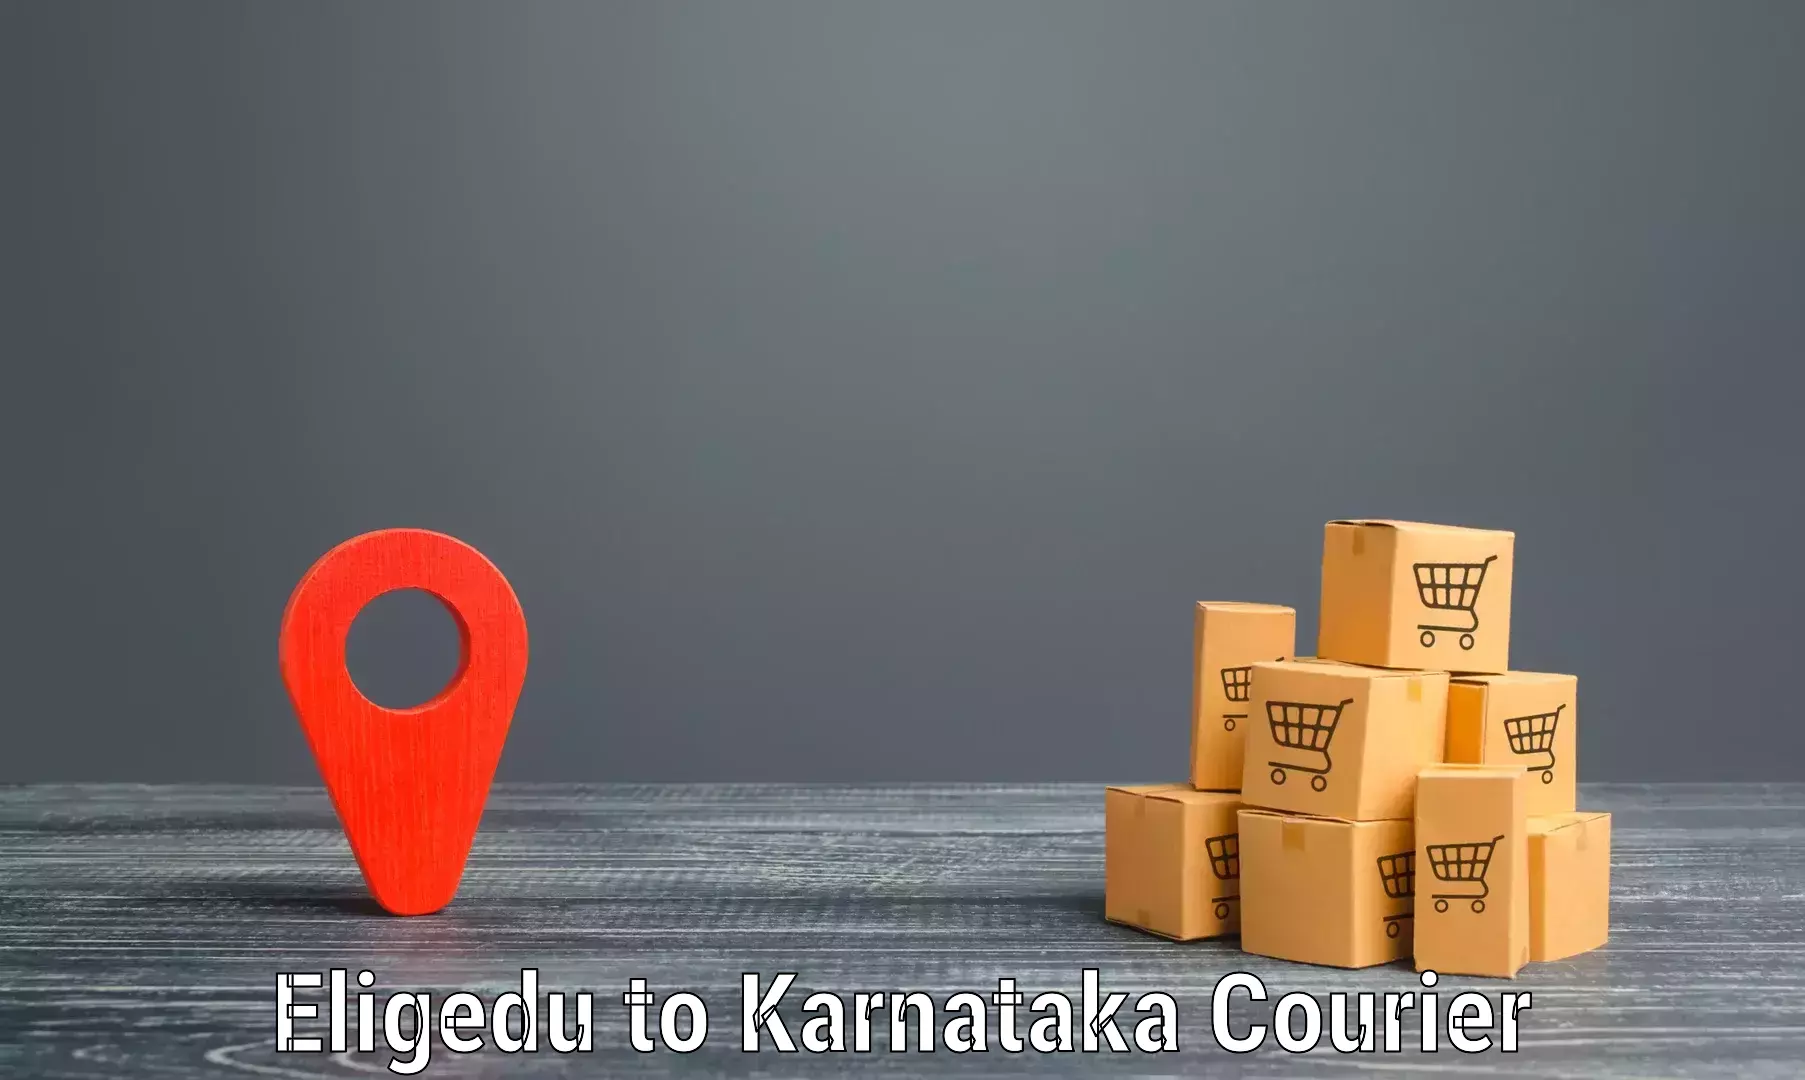 Customer-friendly courier services Eligedu to Belagavi